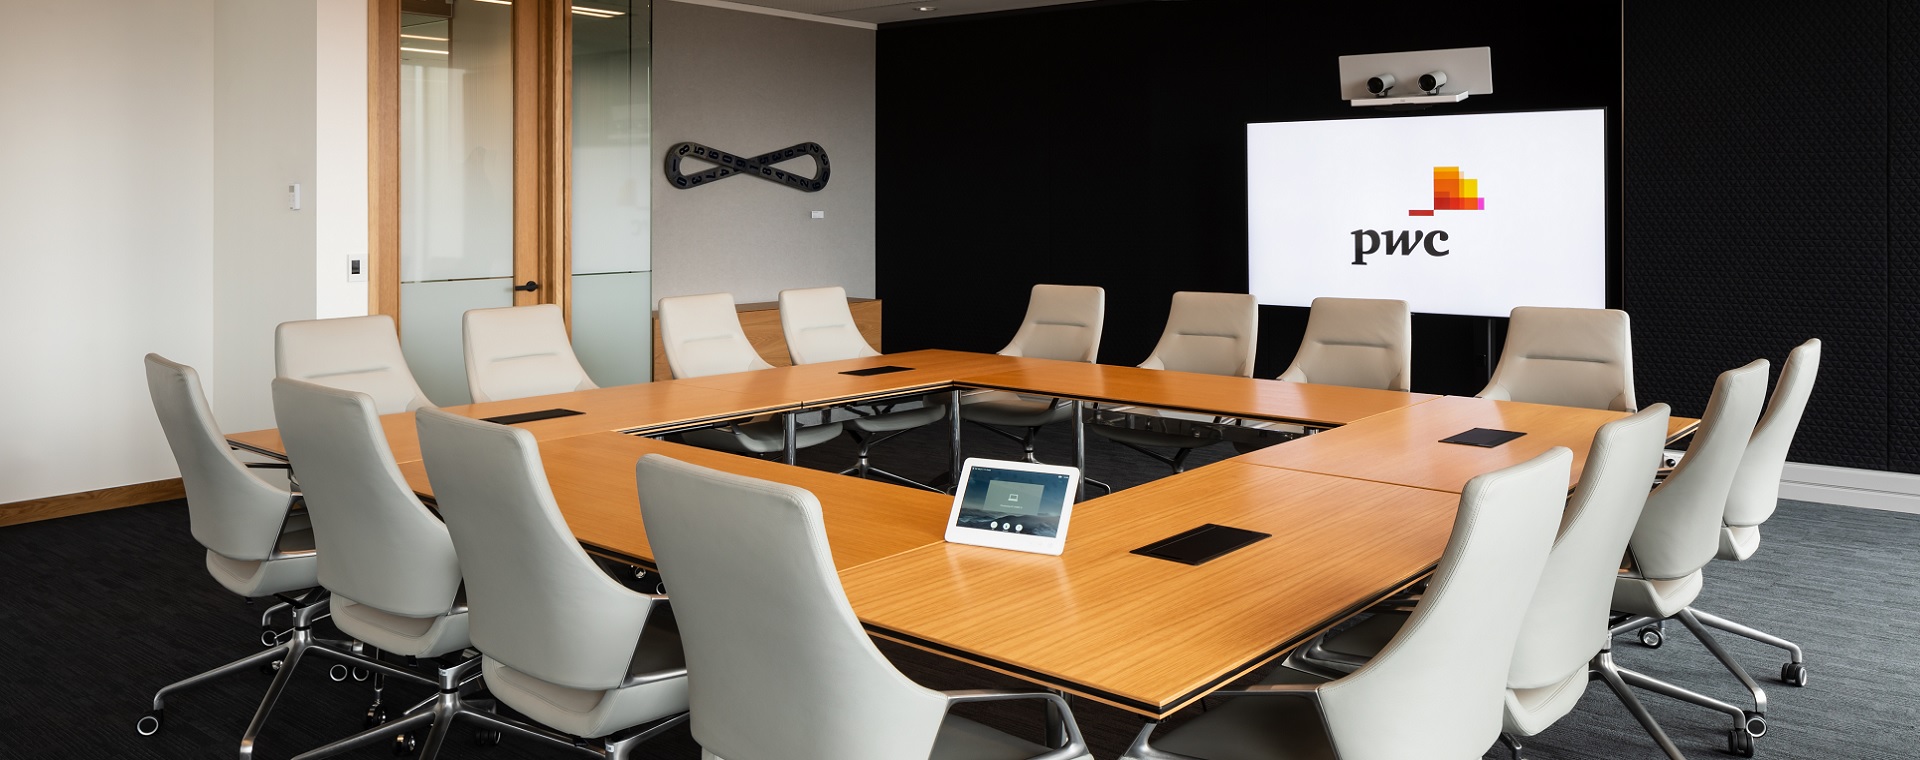 PwC meeting room with tablet control of AV systems, video conferencing system, audio and cameras